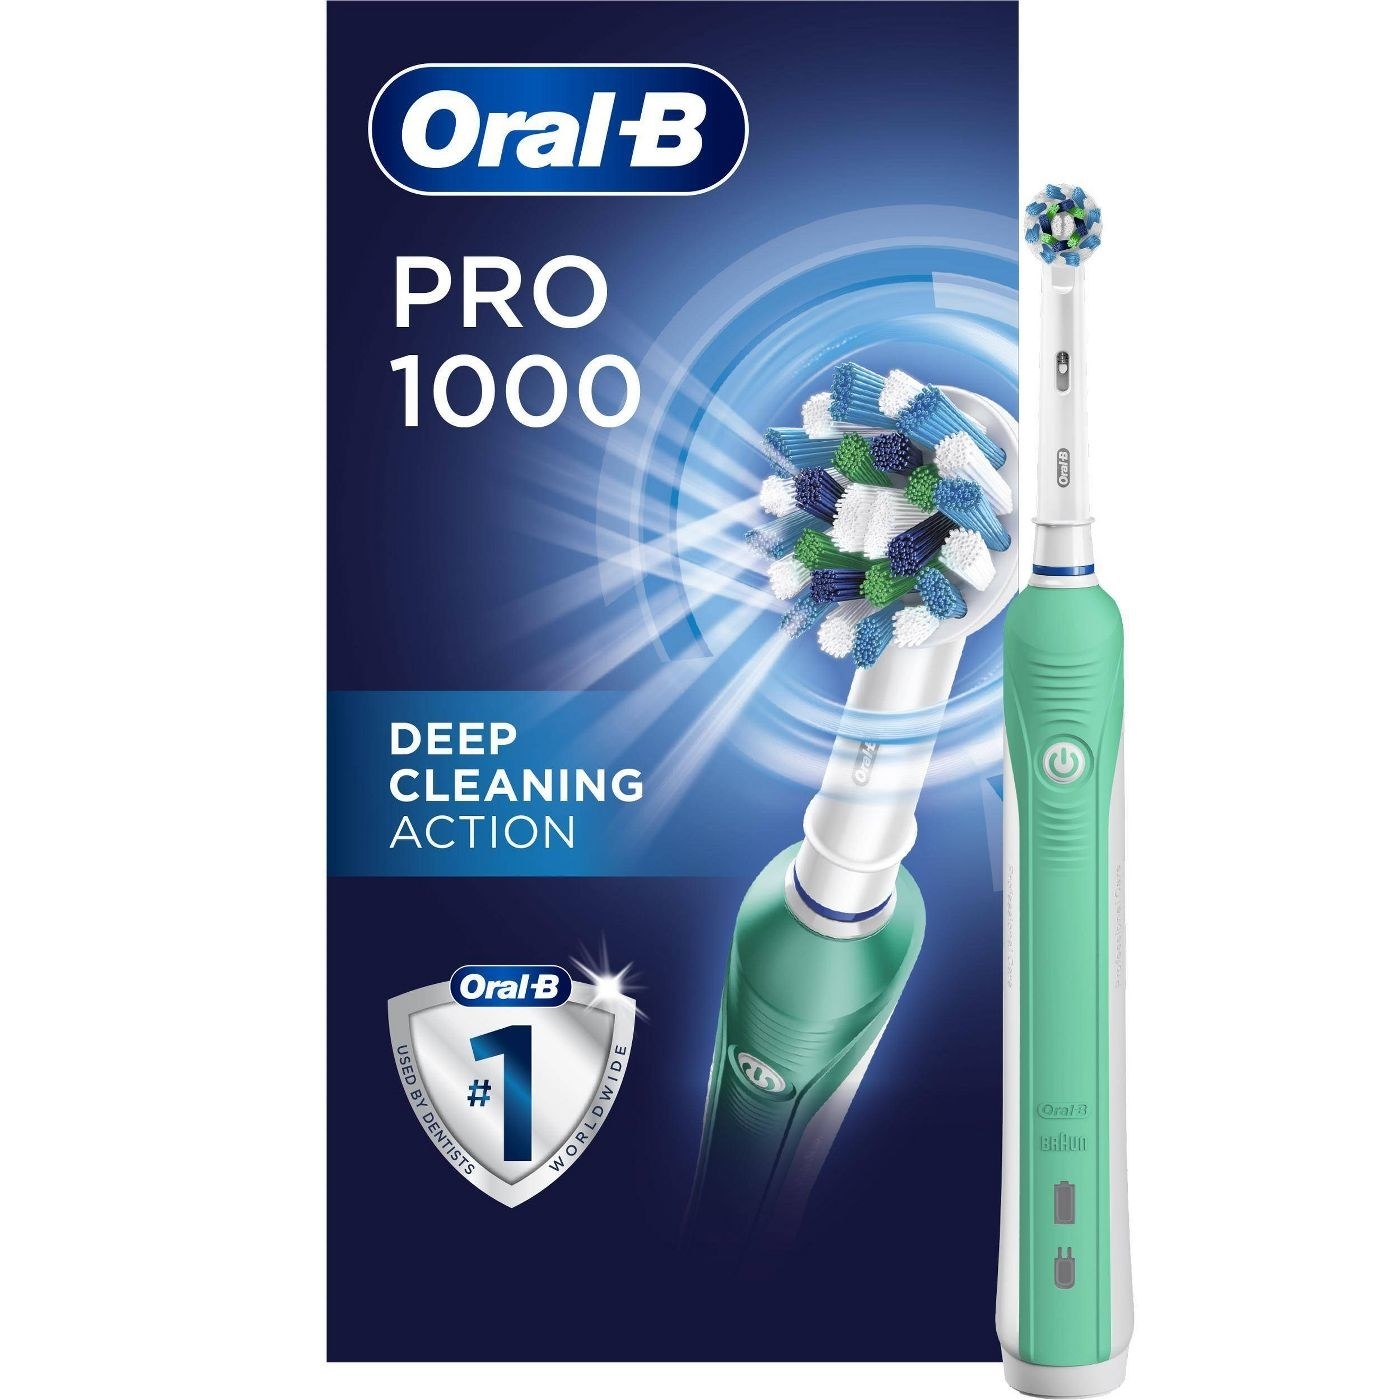 The Oral-B Pro 1000 electric toothbrush in green